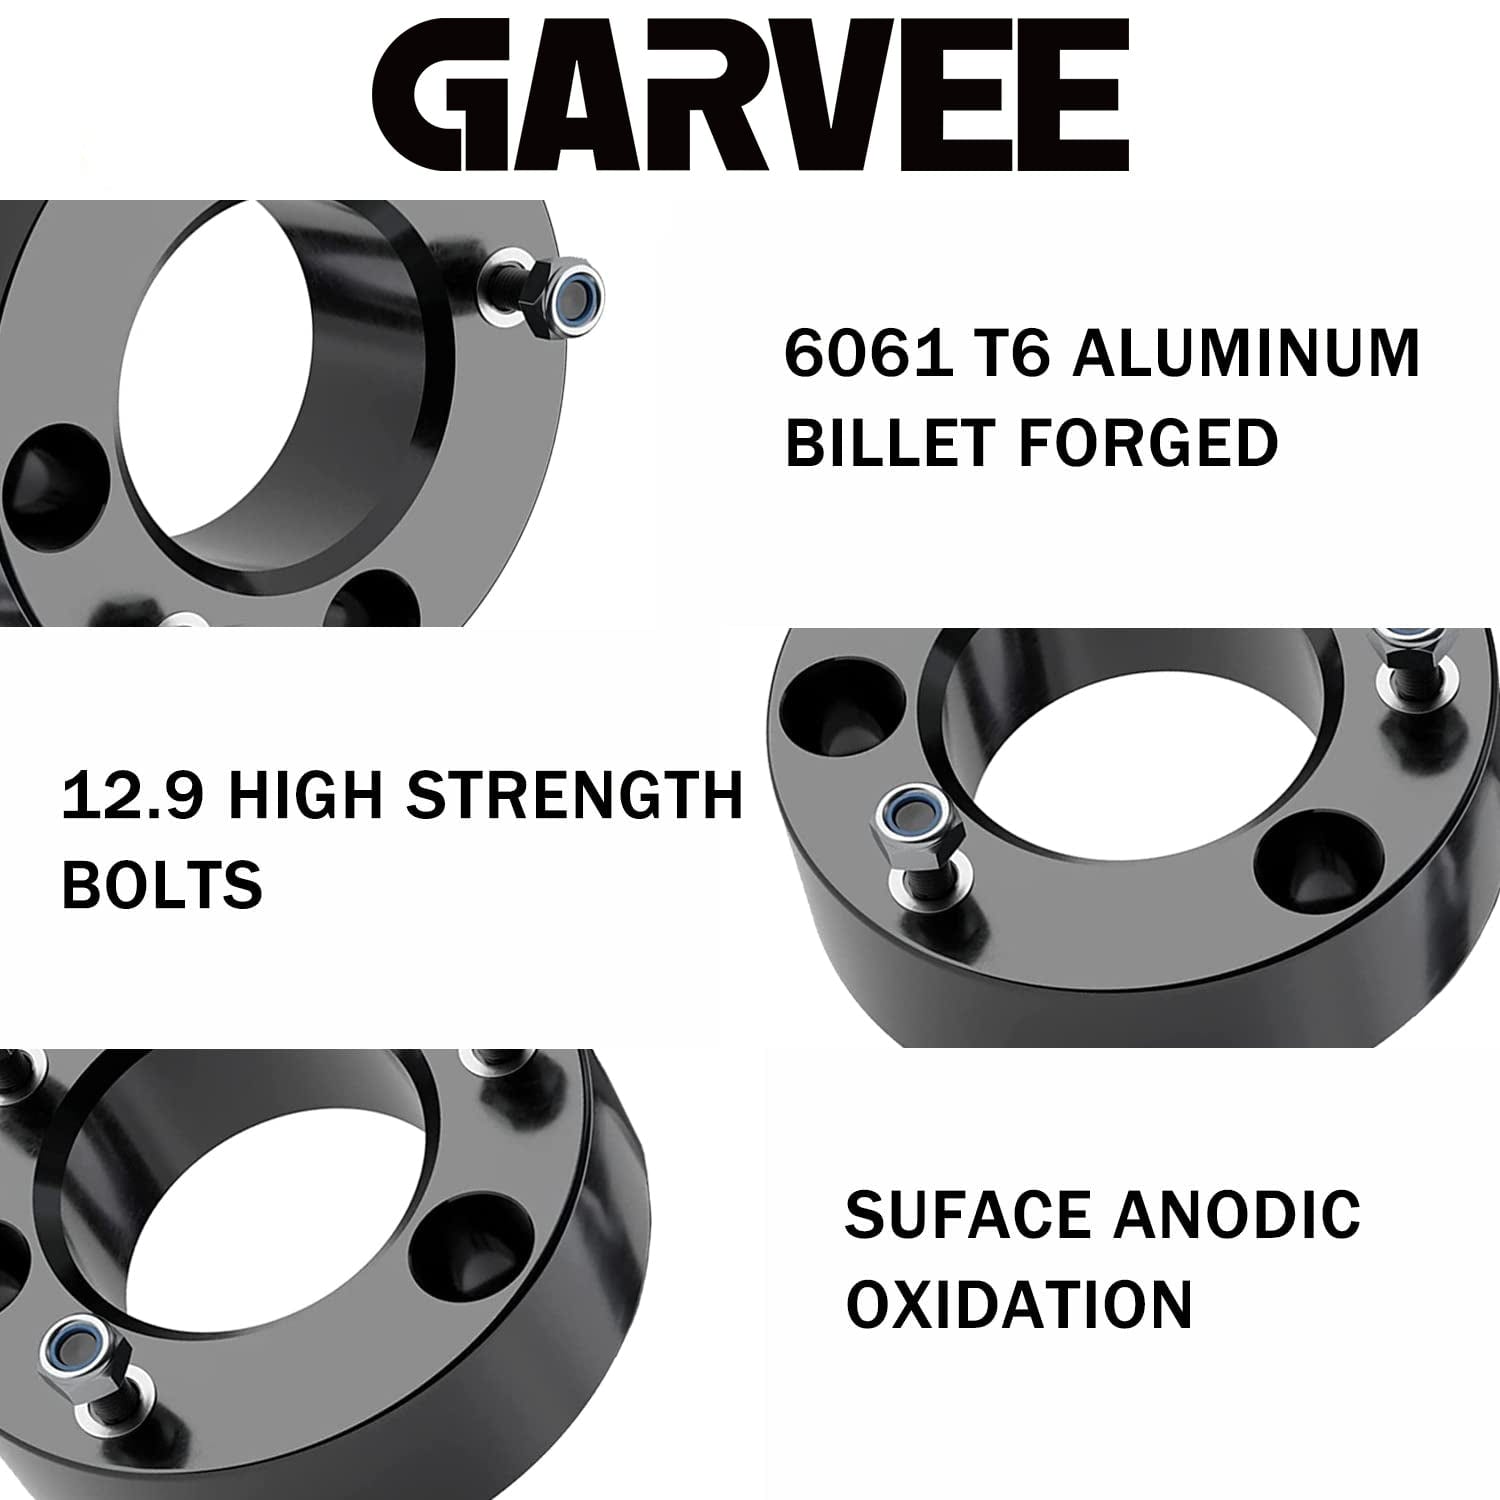 GARVEE 2.0 inch F150 Front Leveling Kits Front Strut Spacers Lift Kit for 2004 - 2021 F150